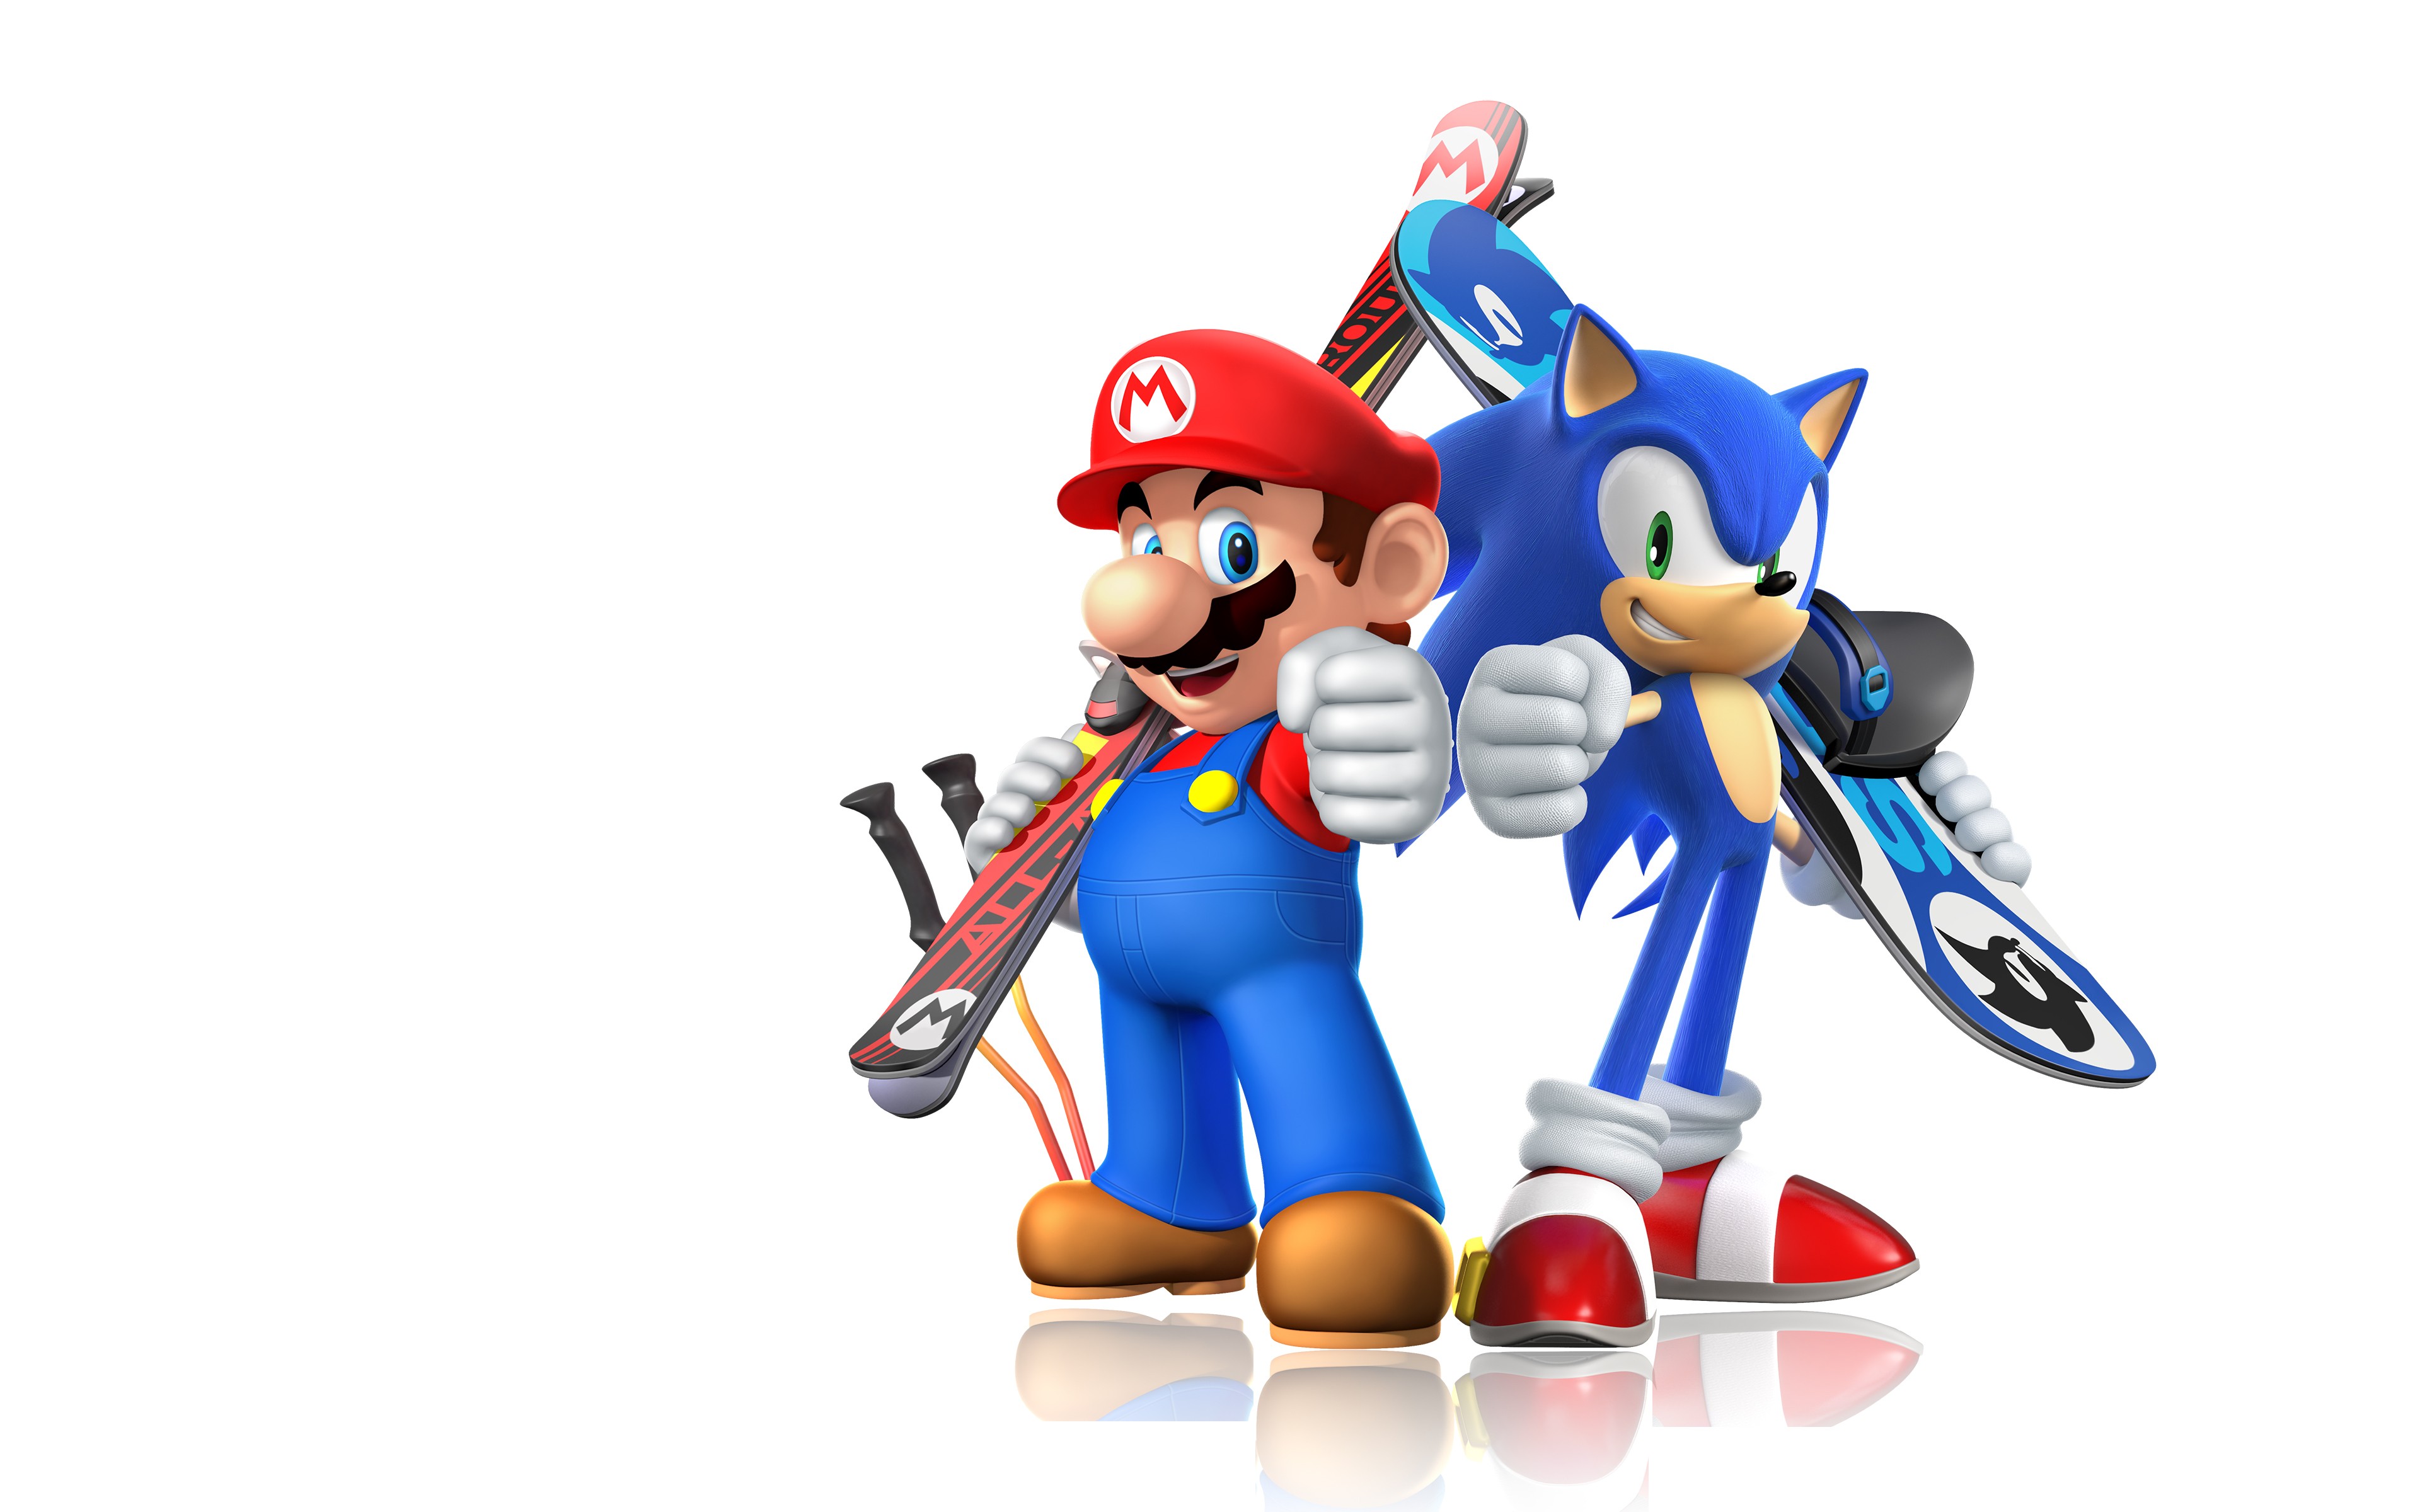 Mario Bros Sonic The Hedgehog Video Games Skis Snowboards Simple Background 3840x2400